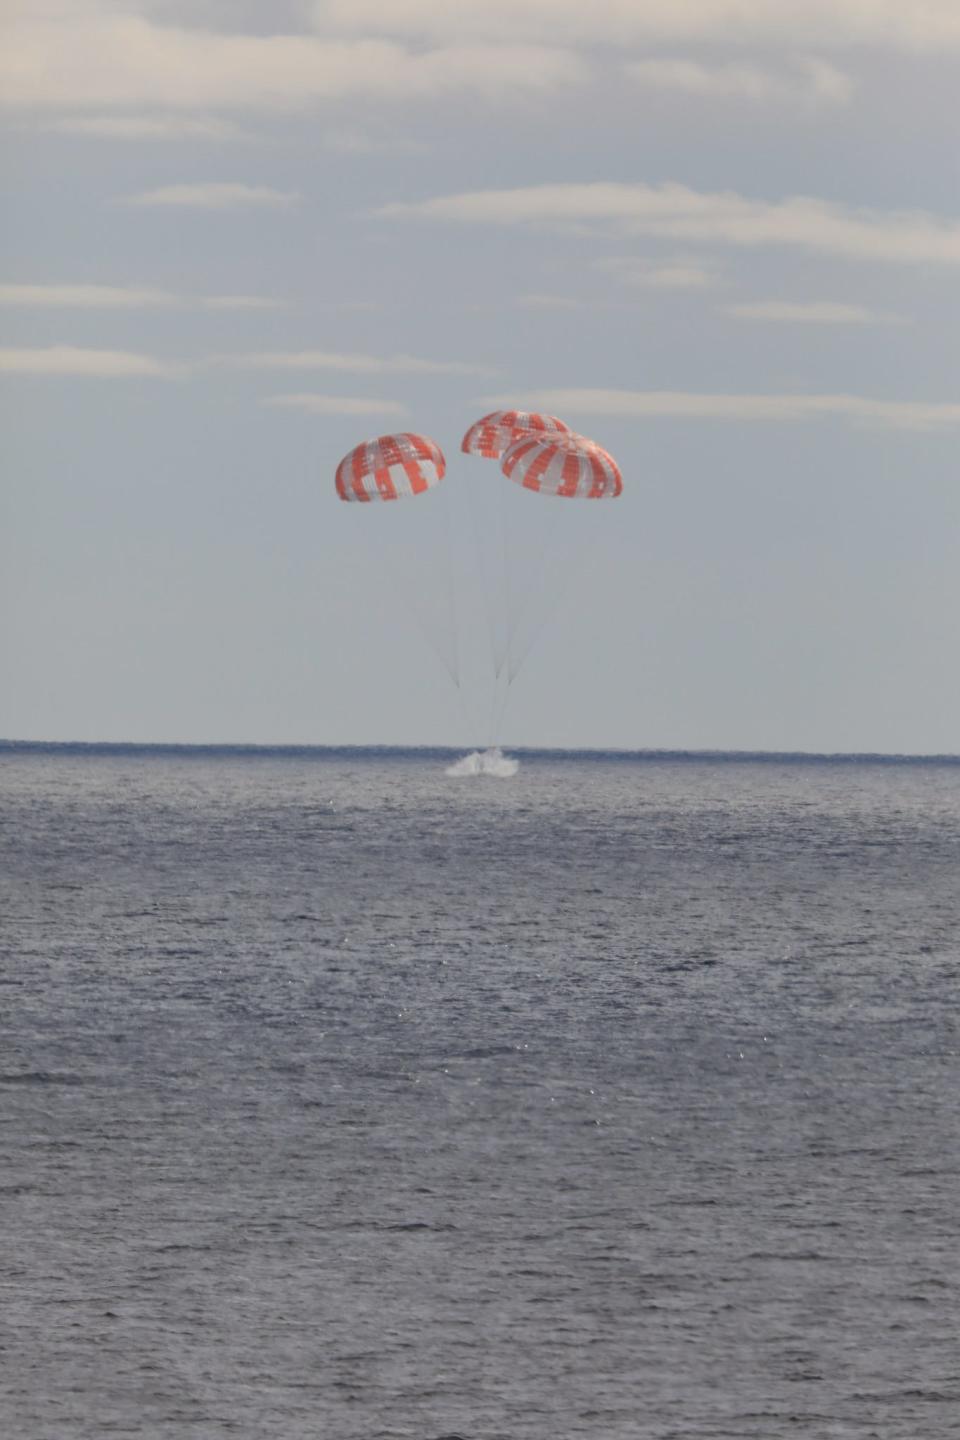 At 12:40 p.m. EST, Dec. 11, 2022, NASA’s Orion spacecraft for the Artemis I mission splashed down in the Pacific Ocean after a 25.5 day mission to the Moon. Orion will be recovered by NASA’s Landing and Recovery team, U.S. Navy and Department of Defense partners aboard the USS Portland ship.